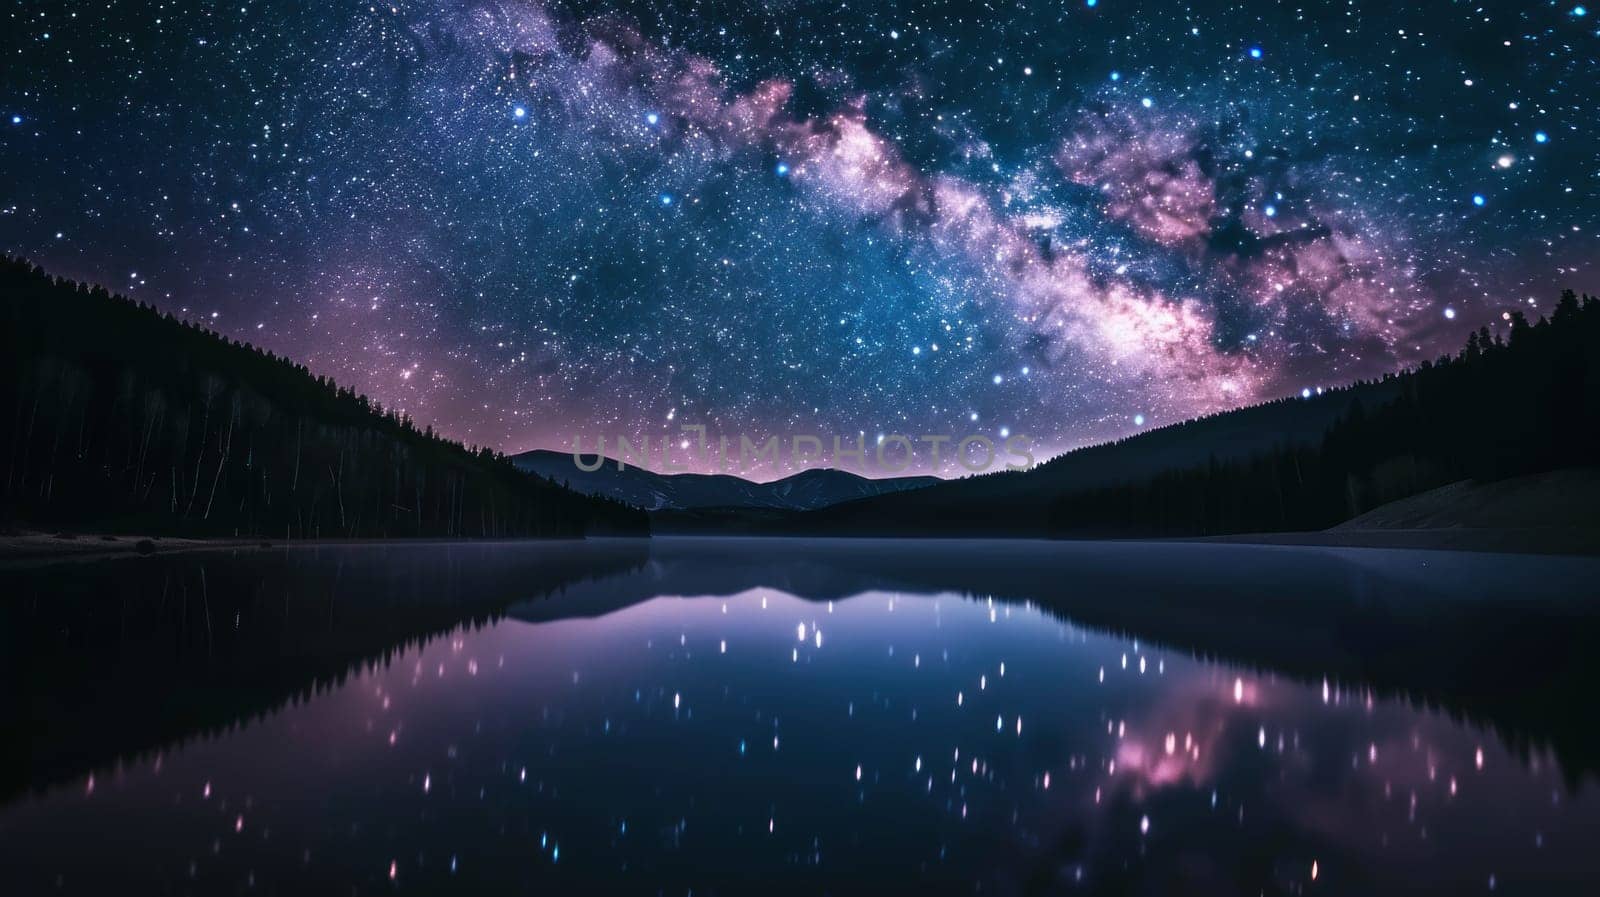 A beautiful night sky with a lake and mountains in the background.